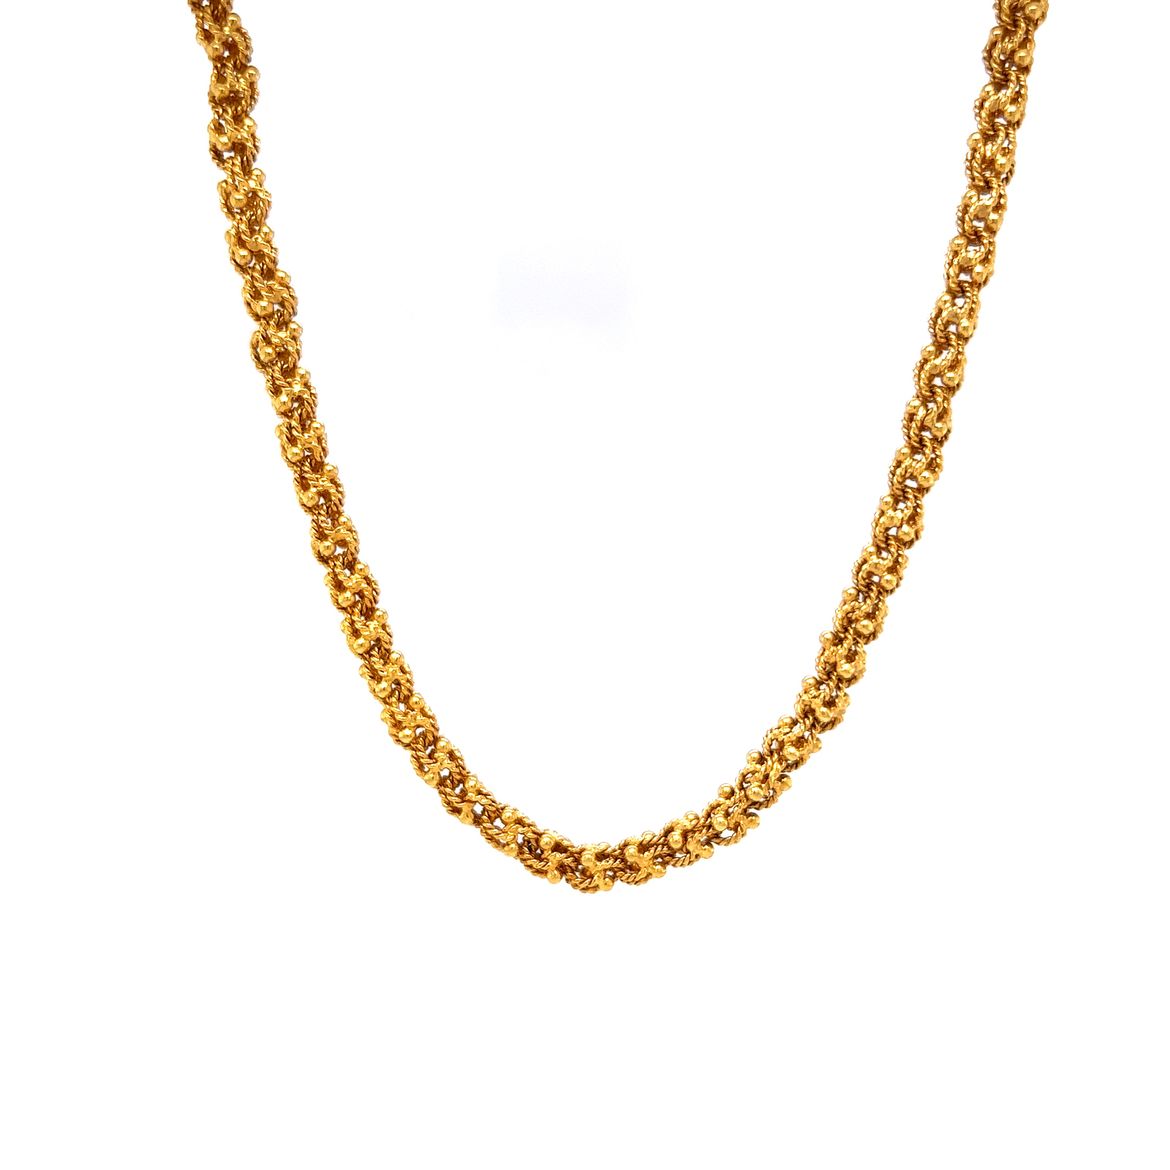 Gold Chain Necklace - African Bead Chain - 18-karat Yellow Gold Chain 20